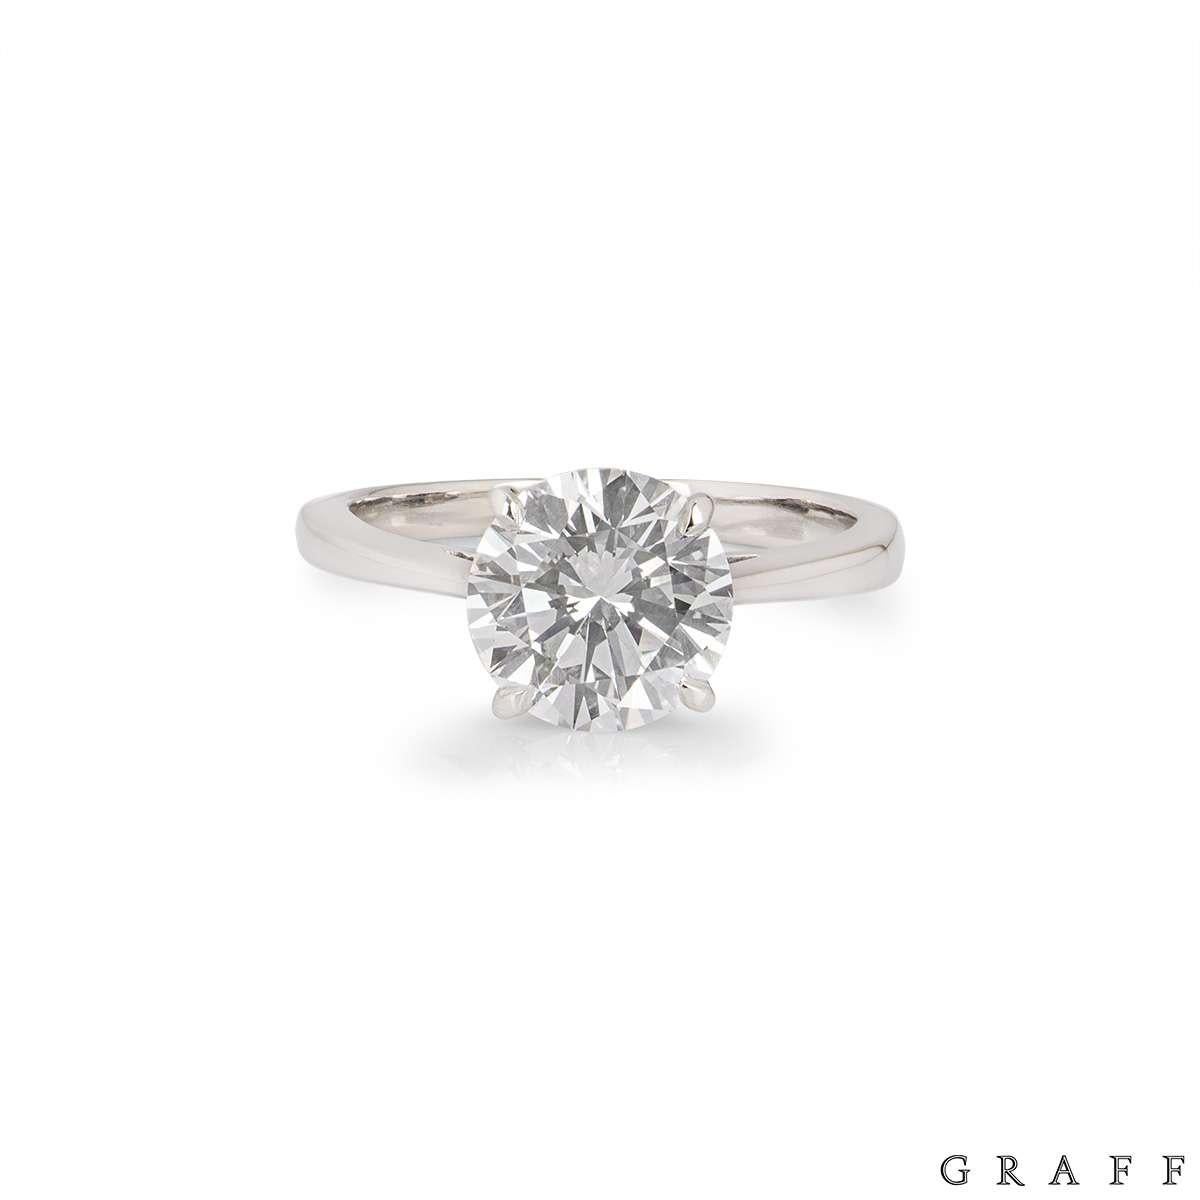 A striking diamond engagement ring by Graff. The ring features a 2.02ct round brilliant cut diamond in a classic 4 claw setting, G colour and VS1 in clarity. The ring is currently a size UK K / EU 50 / US 5.25 but can be adjusted for a perfect fit